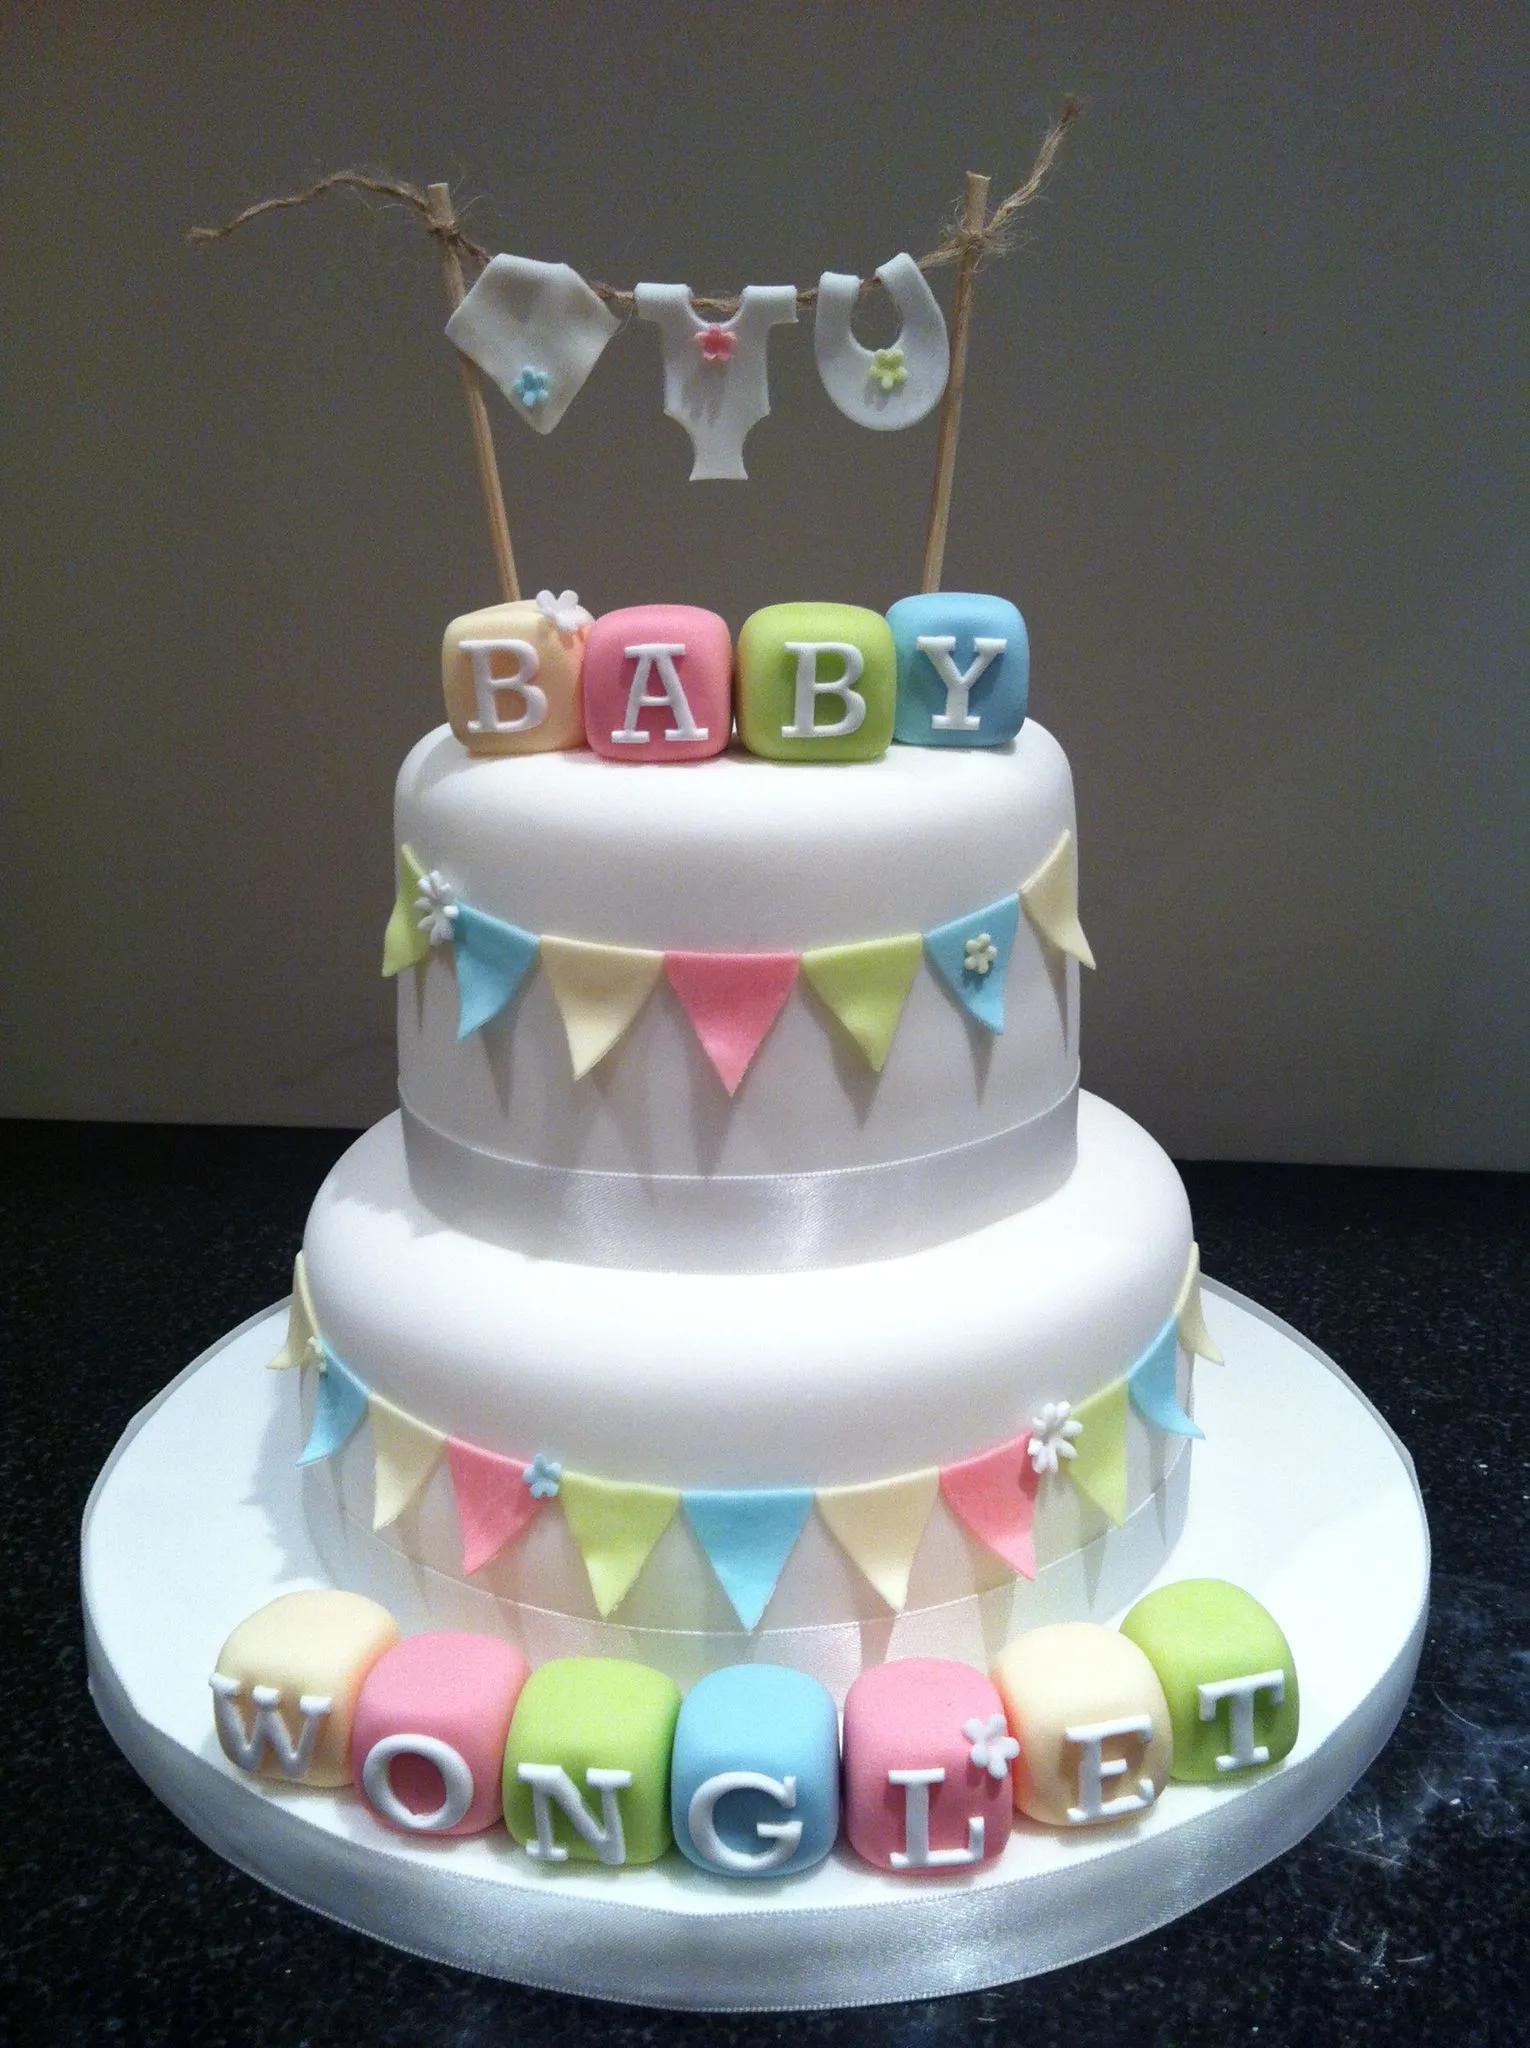 Unisex baby shower cake | Unisex baby shower cakes, Baby shower cakes ...